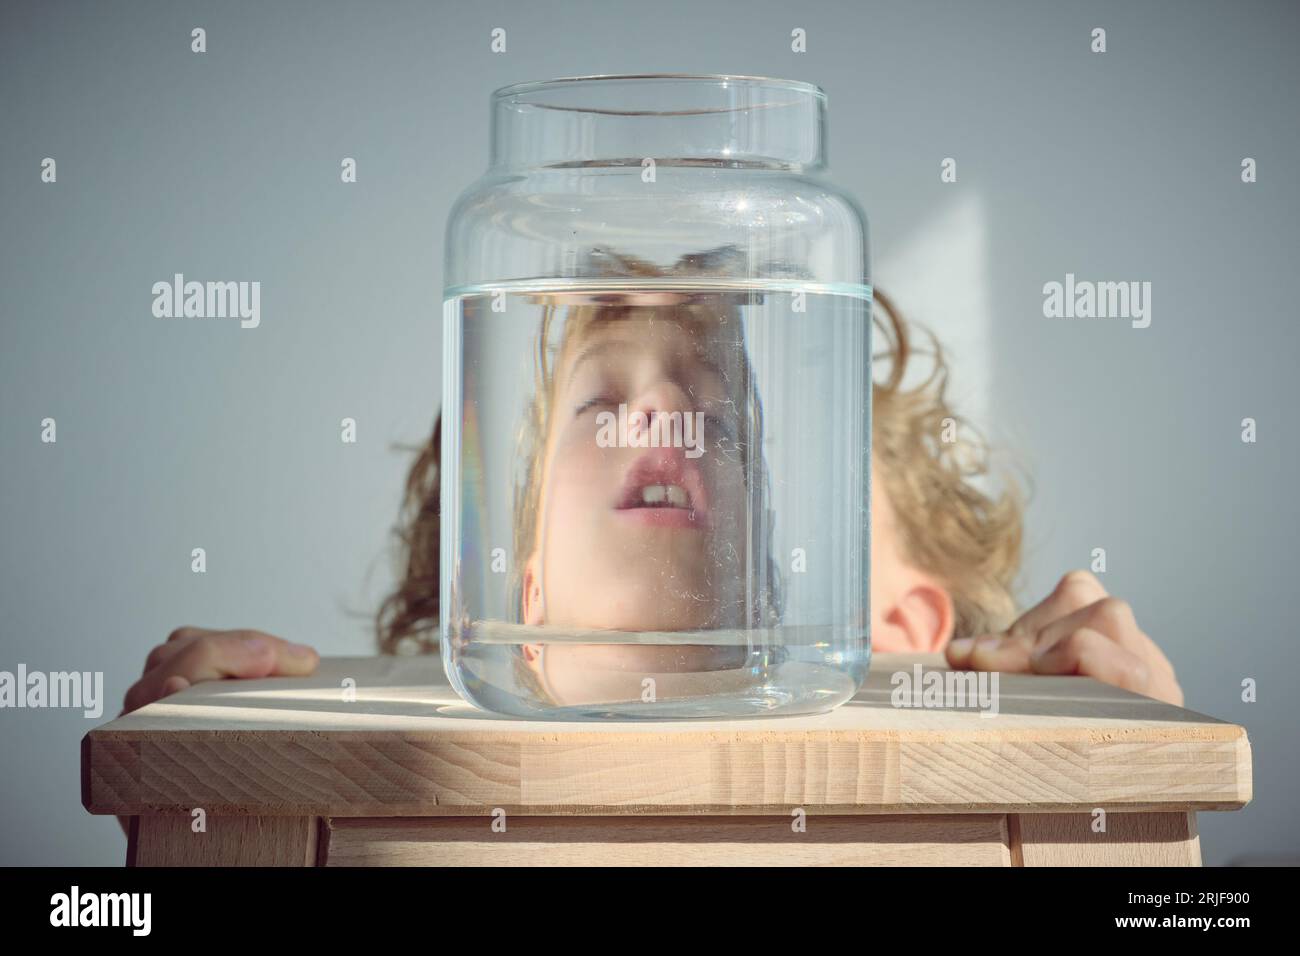 Napping kid with blond hair and open mouth near glass jar of water placed on wooden stool against white background Stock Photo